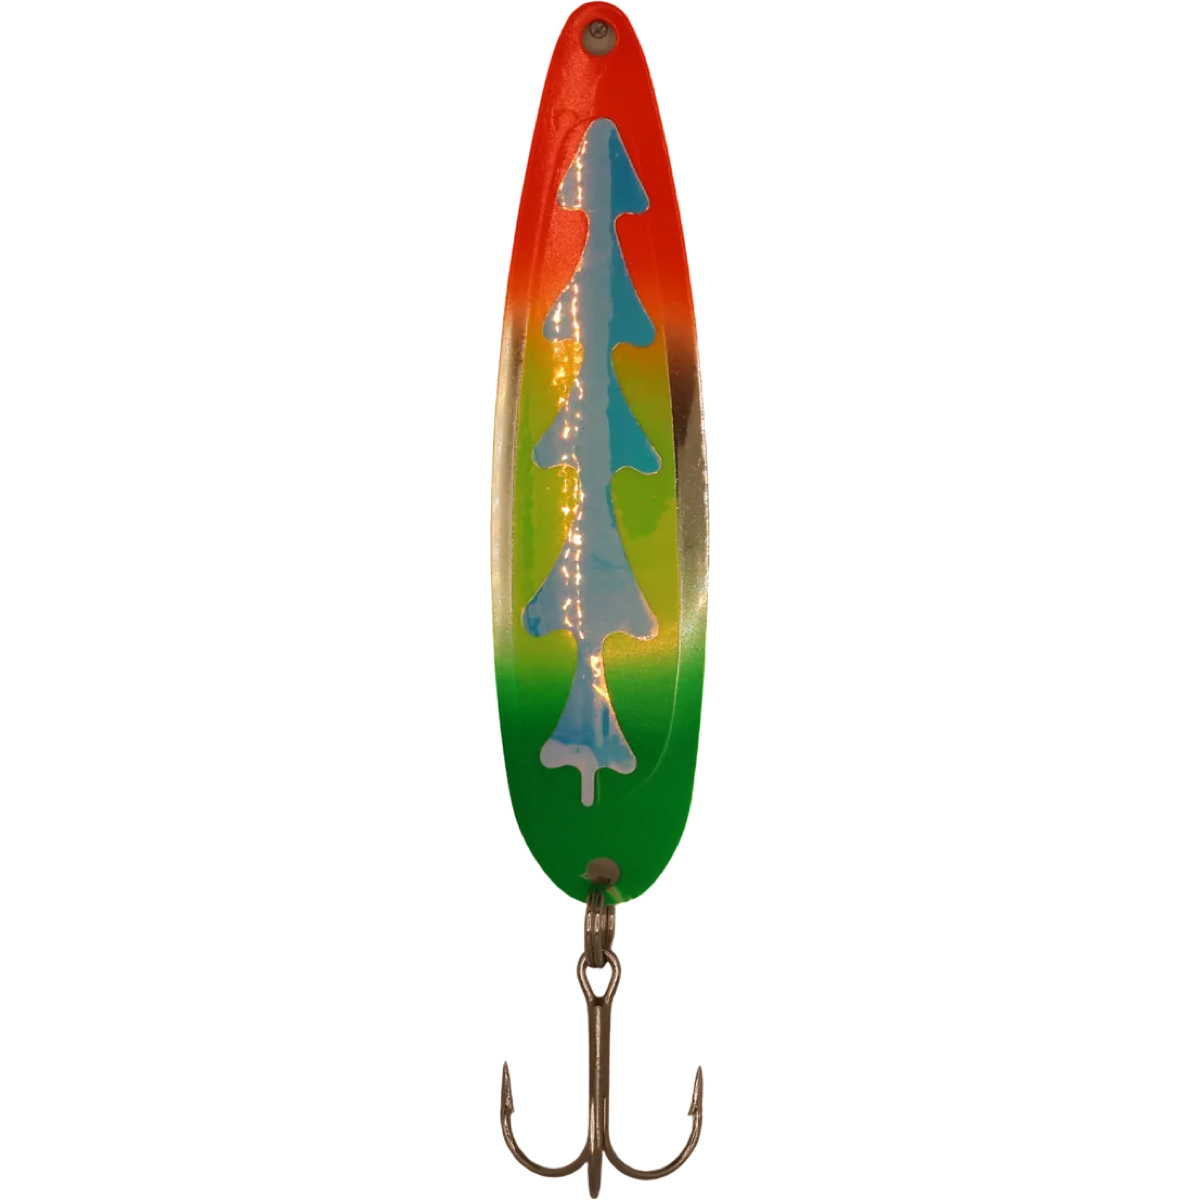 Photo of Advance Tackle Michigan Stinger Standard Spoon - UV for sale at United Tackle Shops.